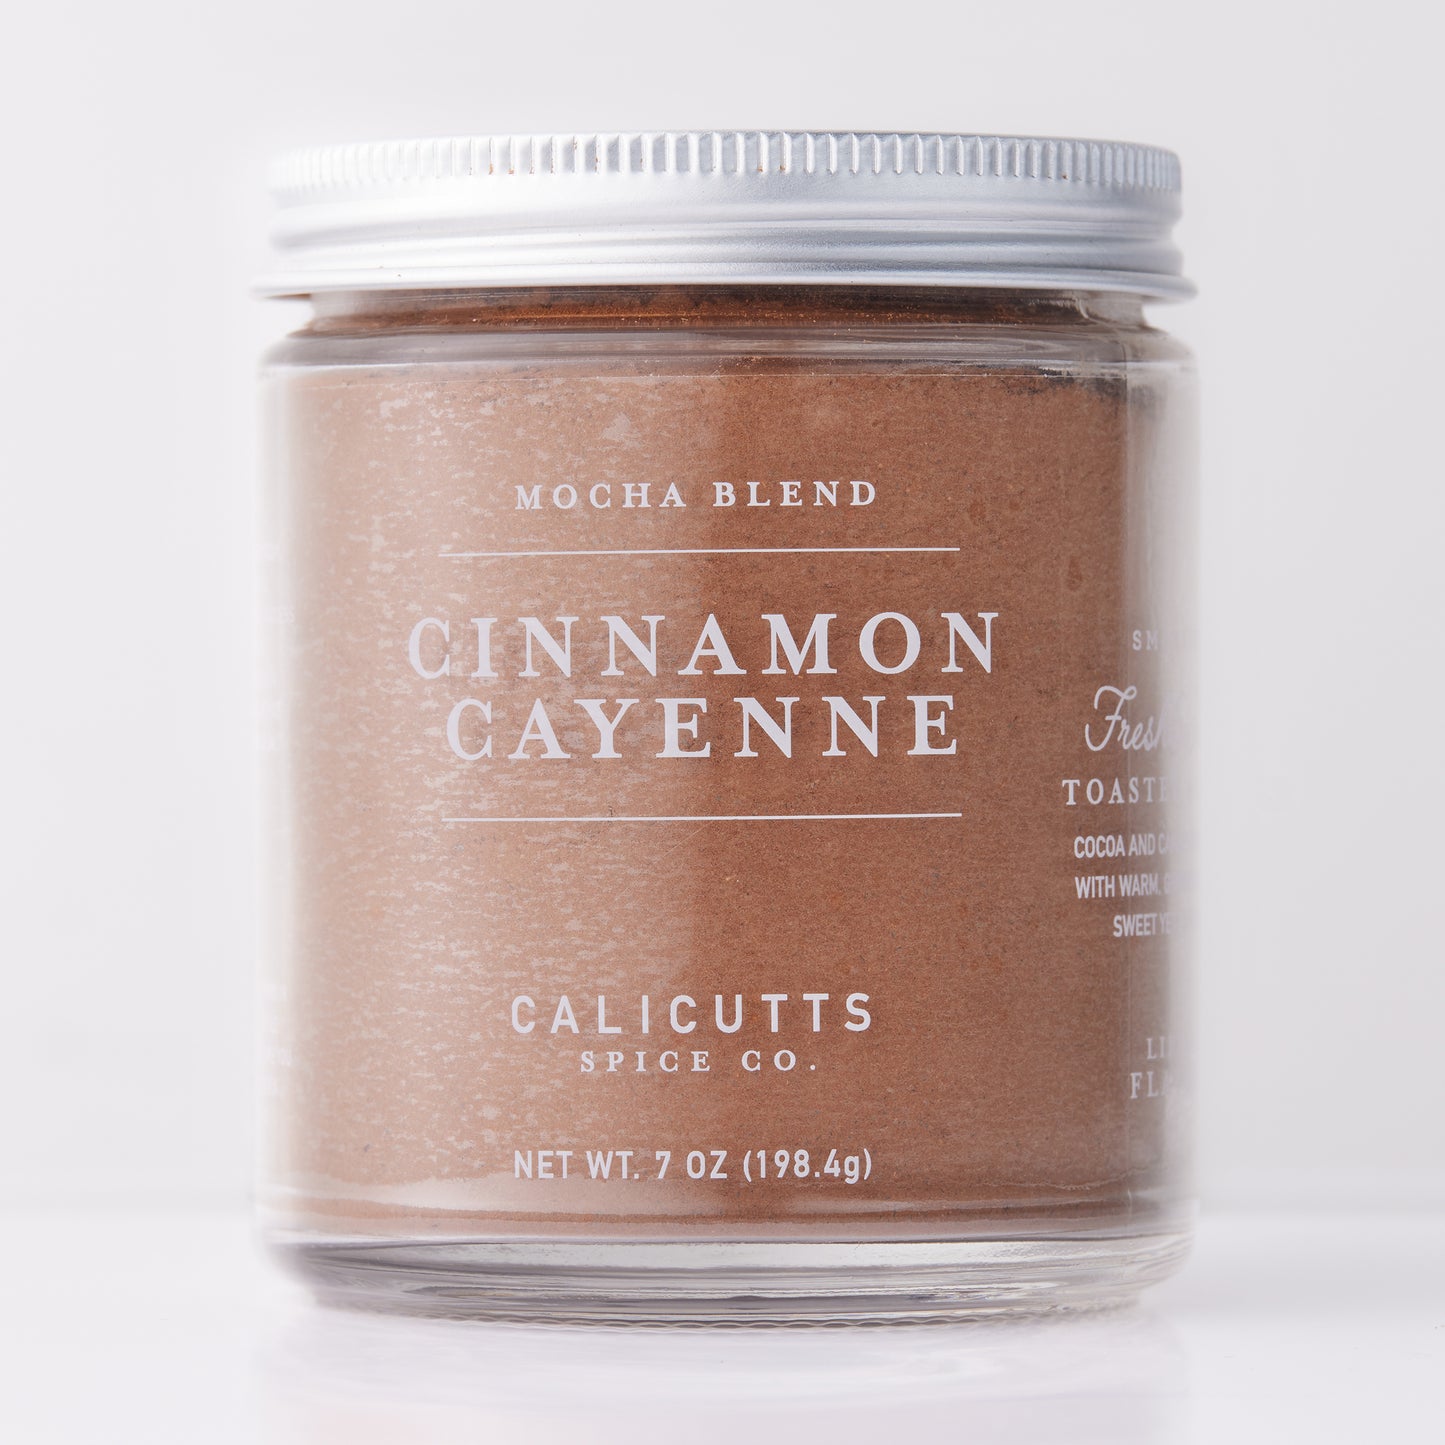 Gather Candle – Calicutts Spice Co.